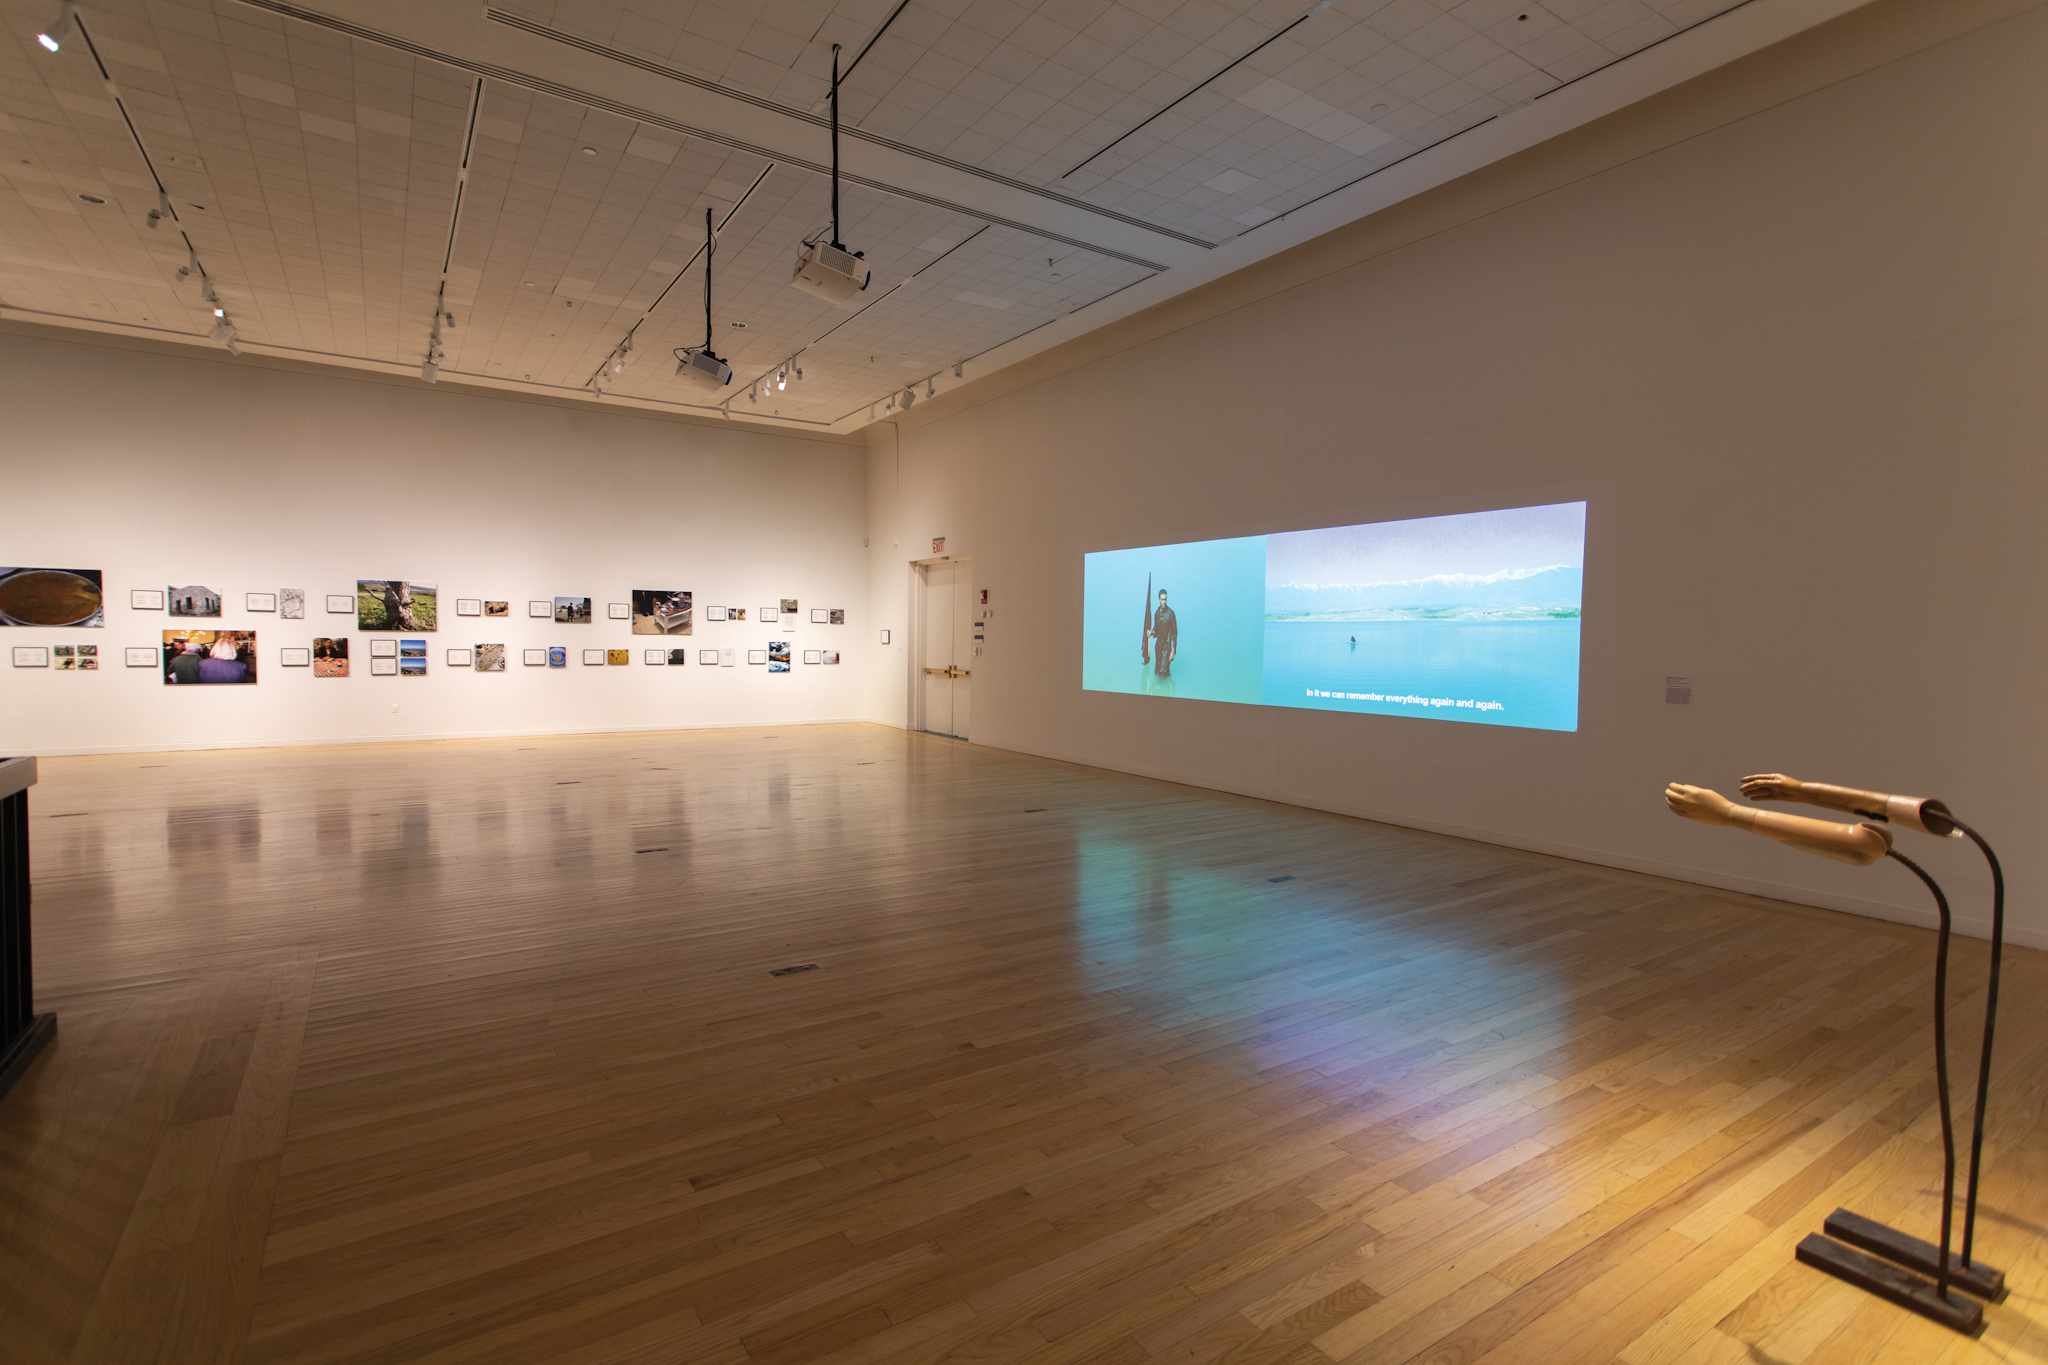 A bright blue video projection on the far right wall is part of an exhibit at Tufts University Art Galleries.